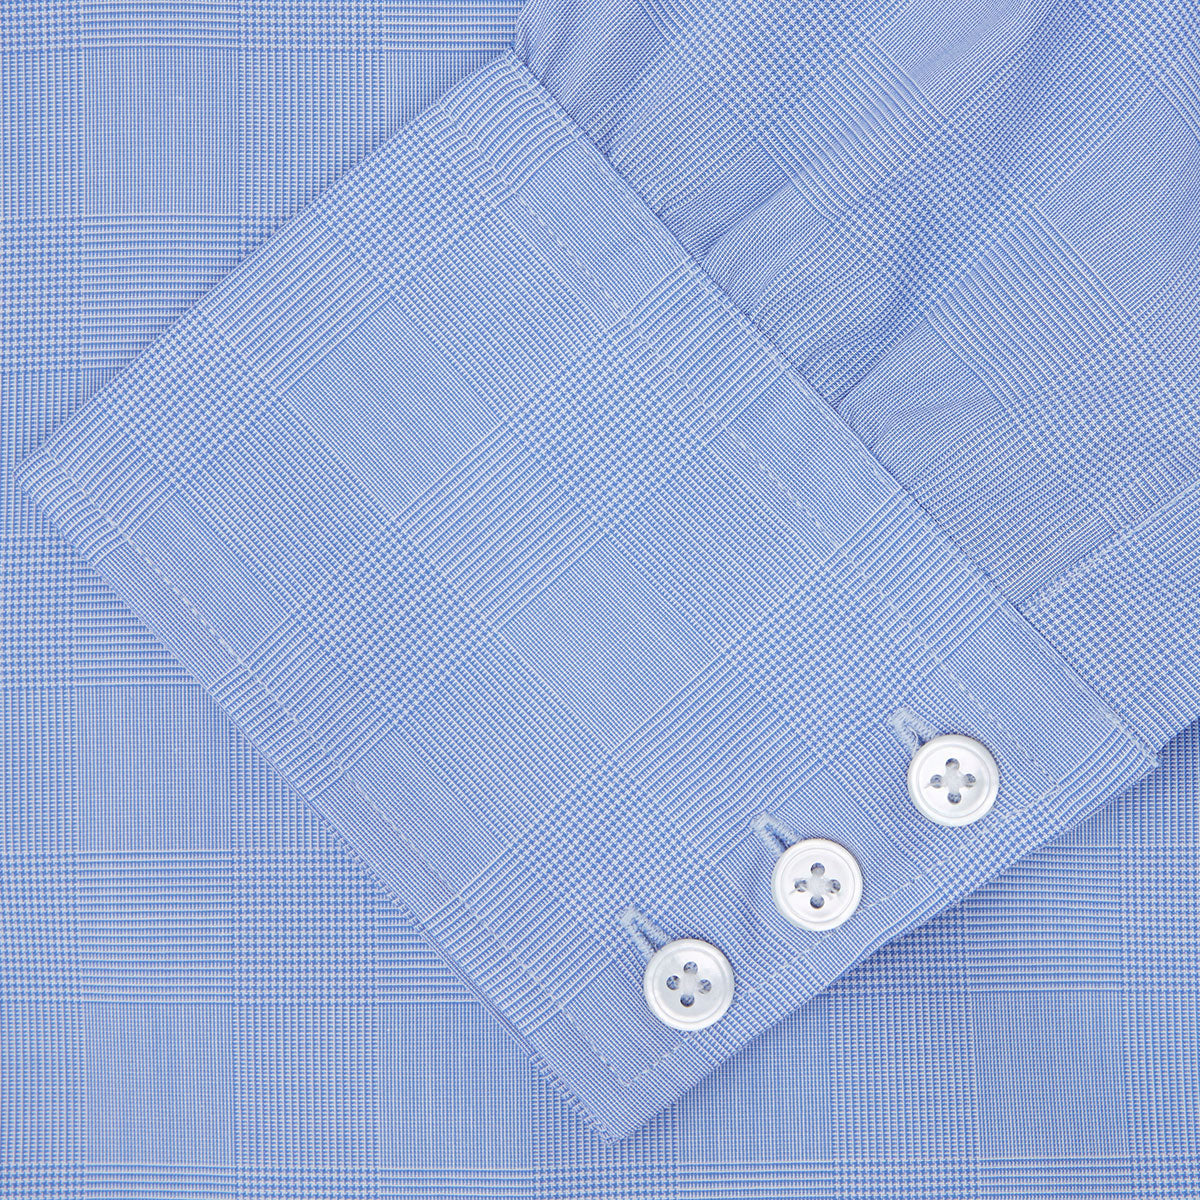 Blue Prince of Wales Check Shirt with T&A Collar and 3-Button Cuffs